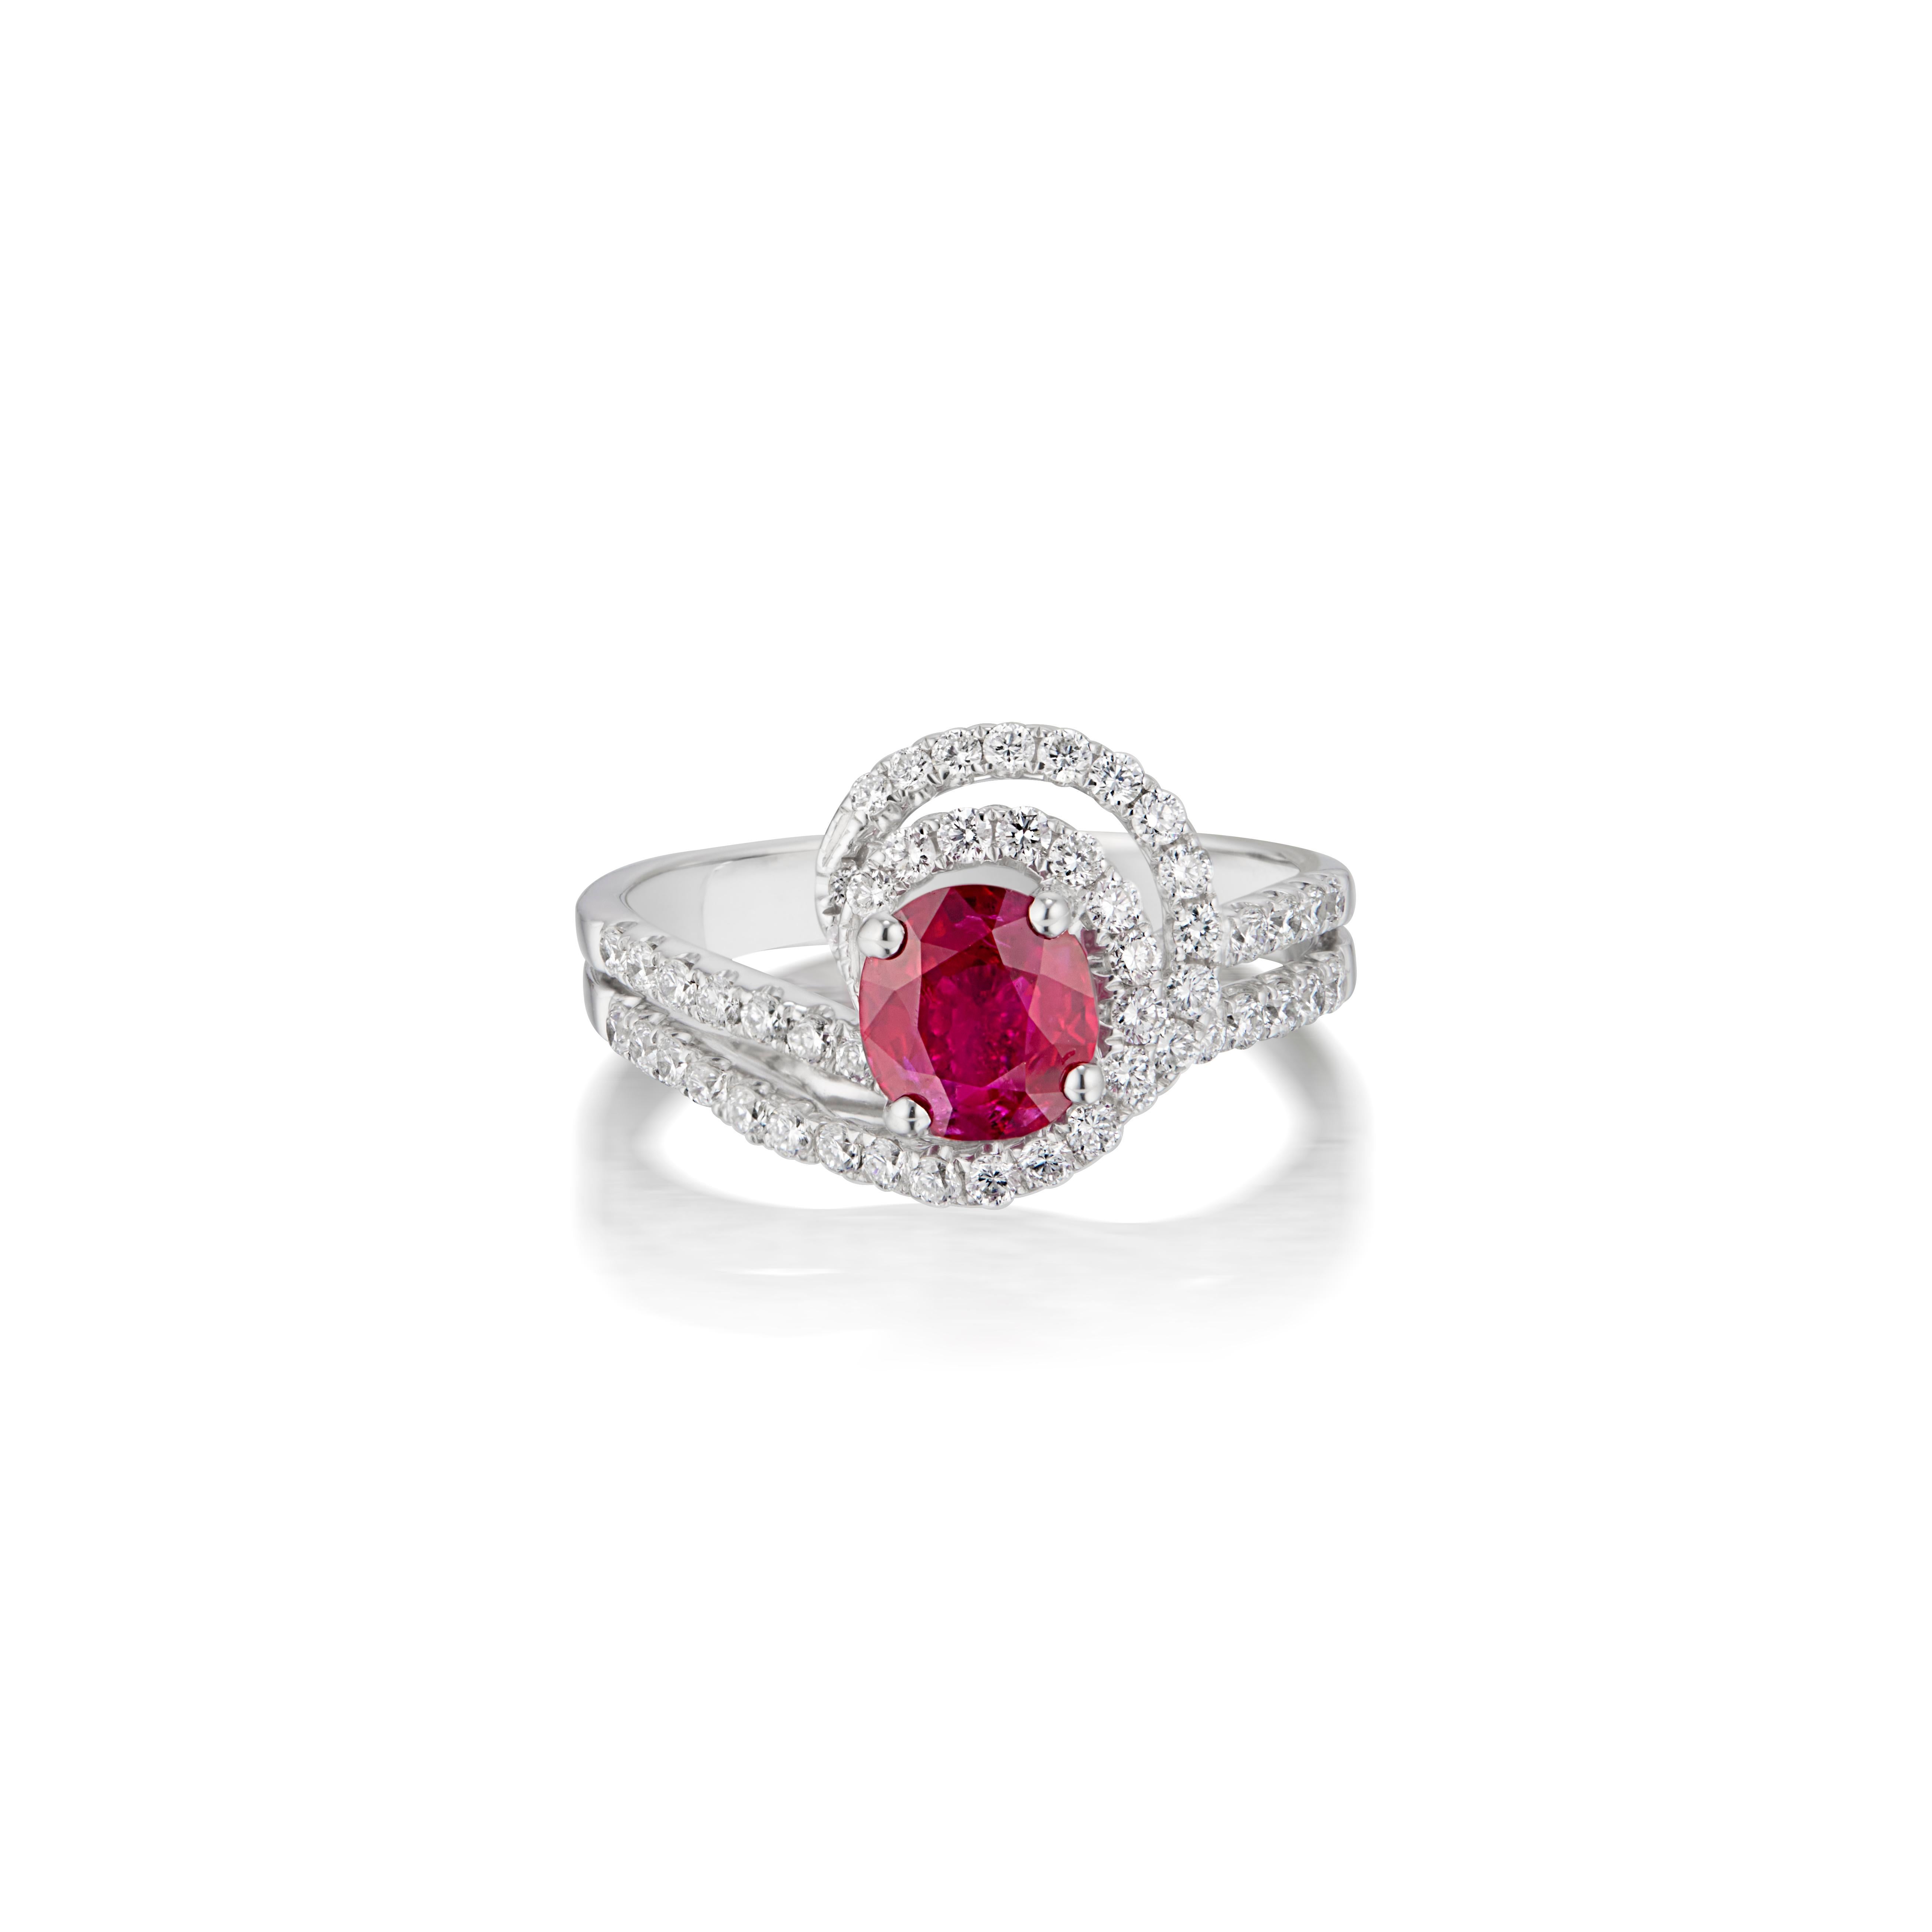 18K WHITE GOLD 
38 DIAMONDS   0.30 CARATS
1 NO-HEAT BURMESE RUBY  1.07 CARATS
GUBELIN LAB CERTIFIED, RED

Introducing our captivating The Eternal Whirl Ring, featuring a captivating 1.07 carat Burma No-heat Ruby at its heart. The deep red ruby